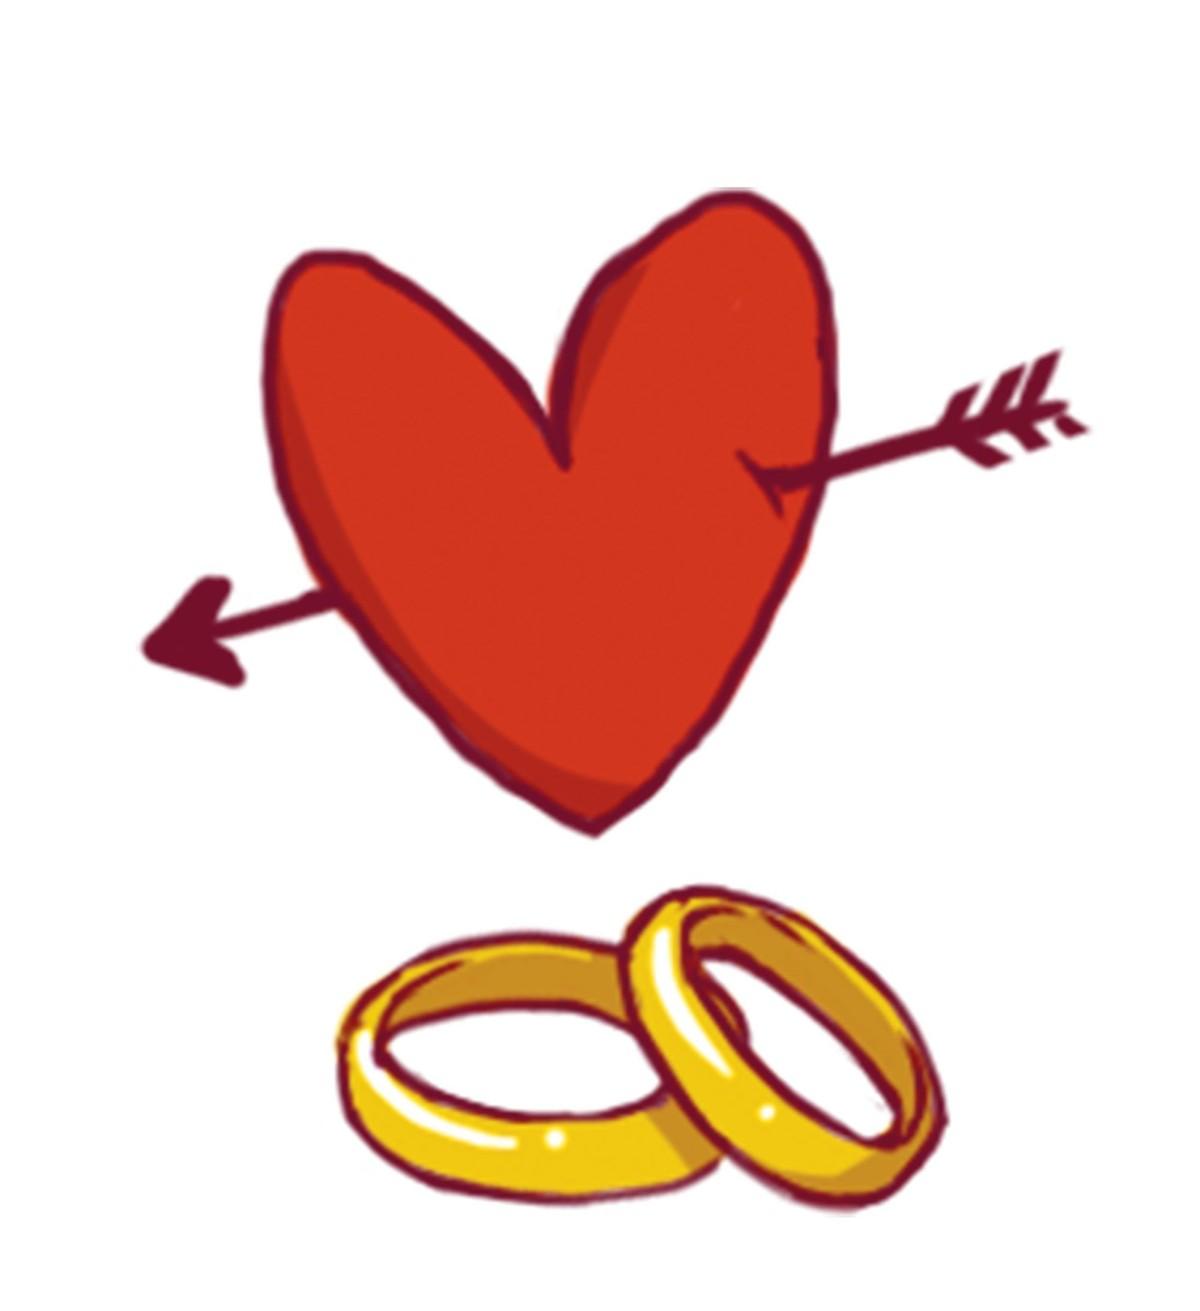 A red heart with two gold rings